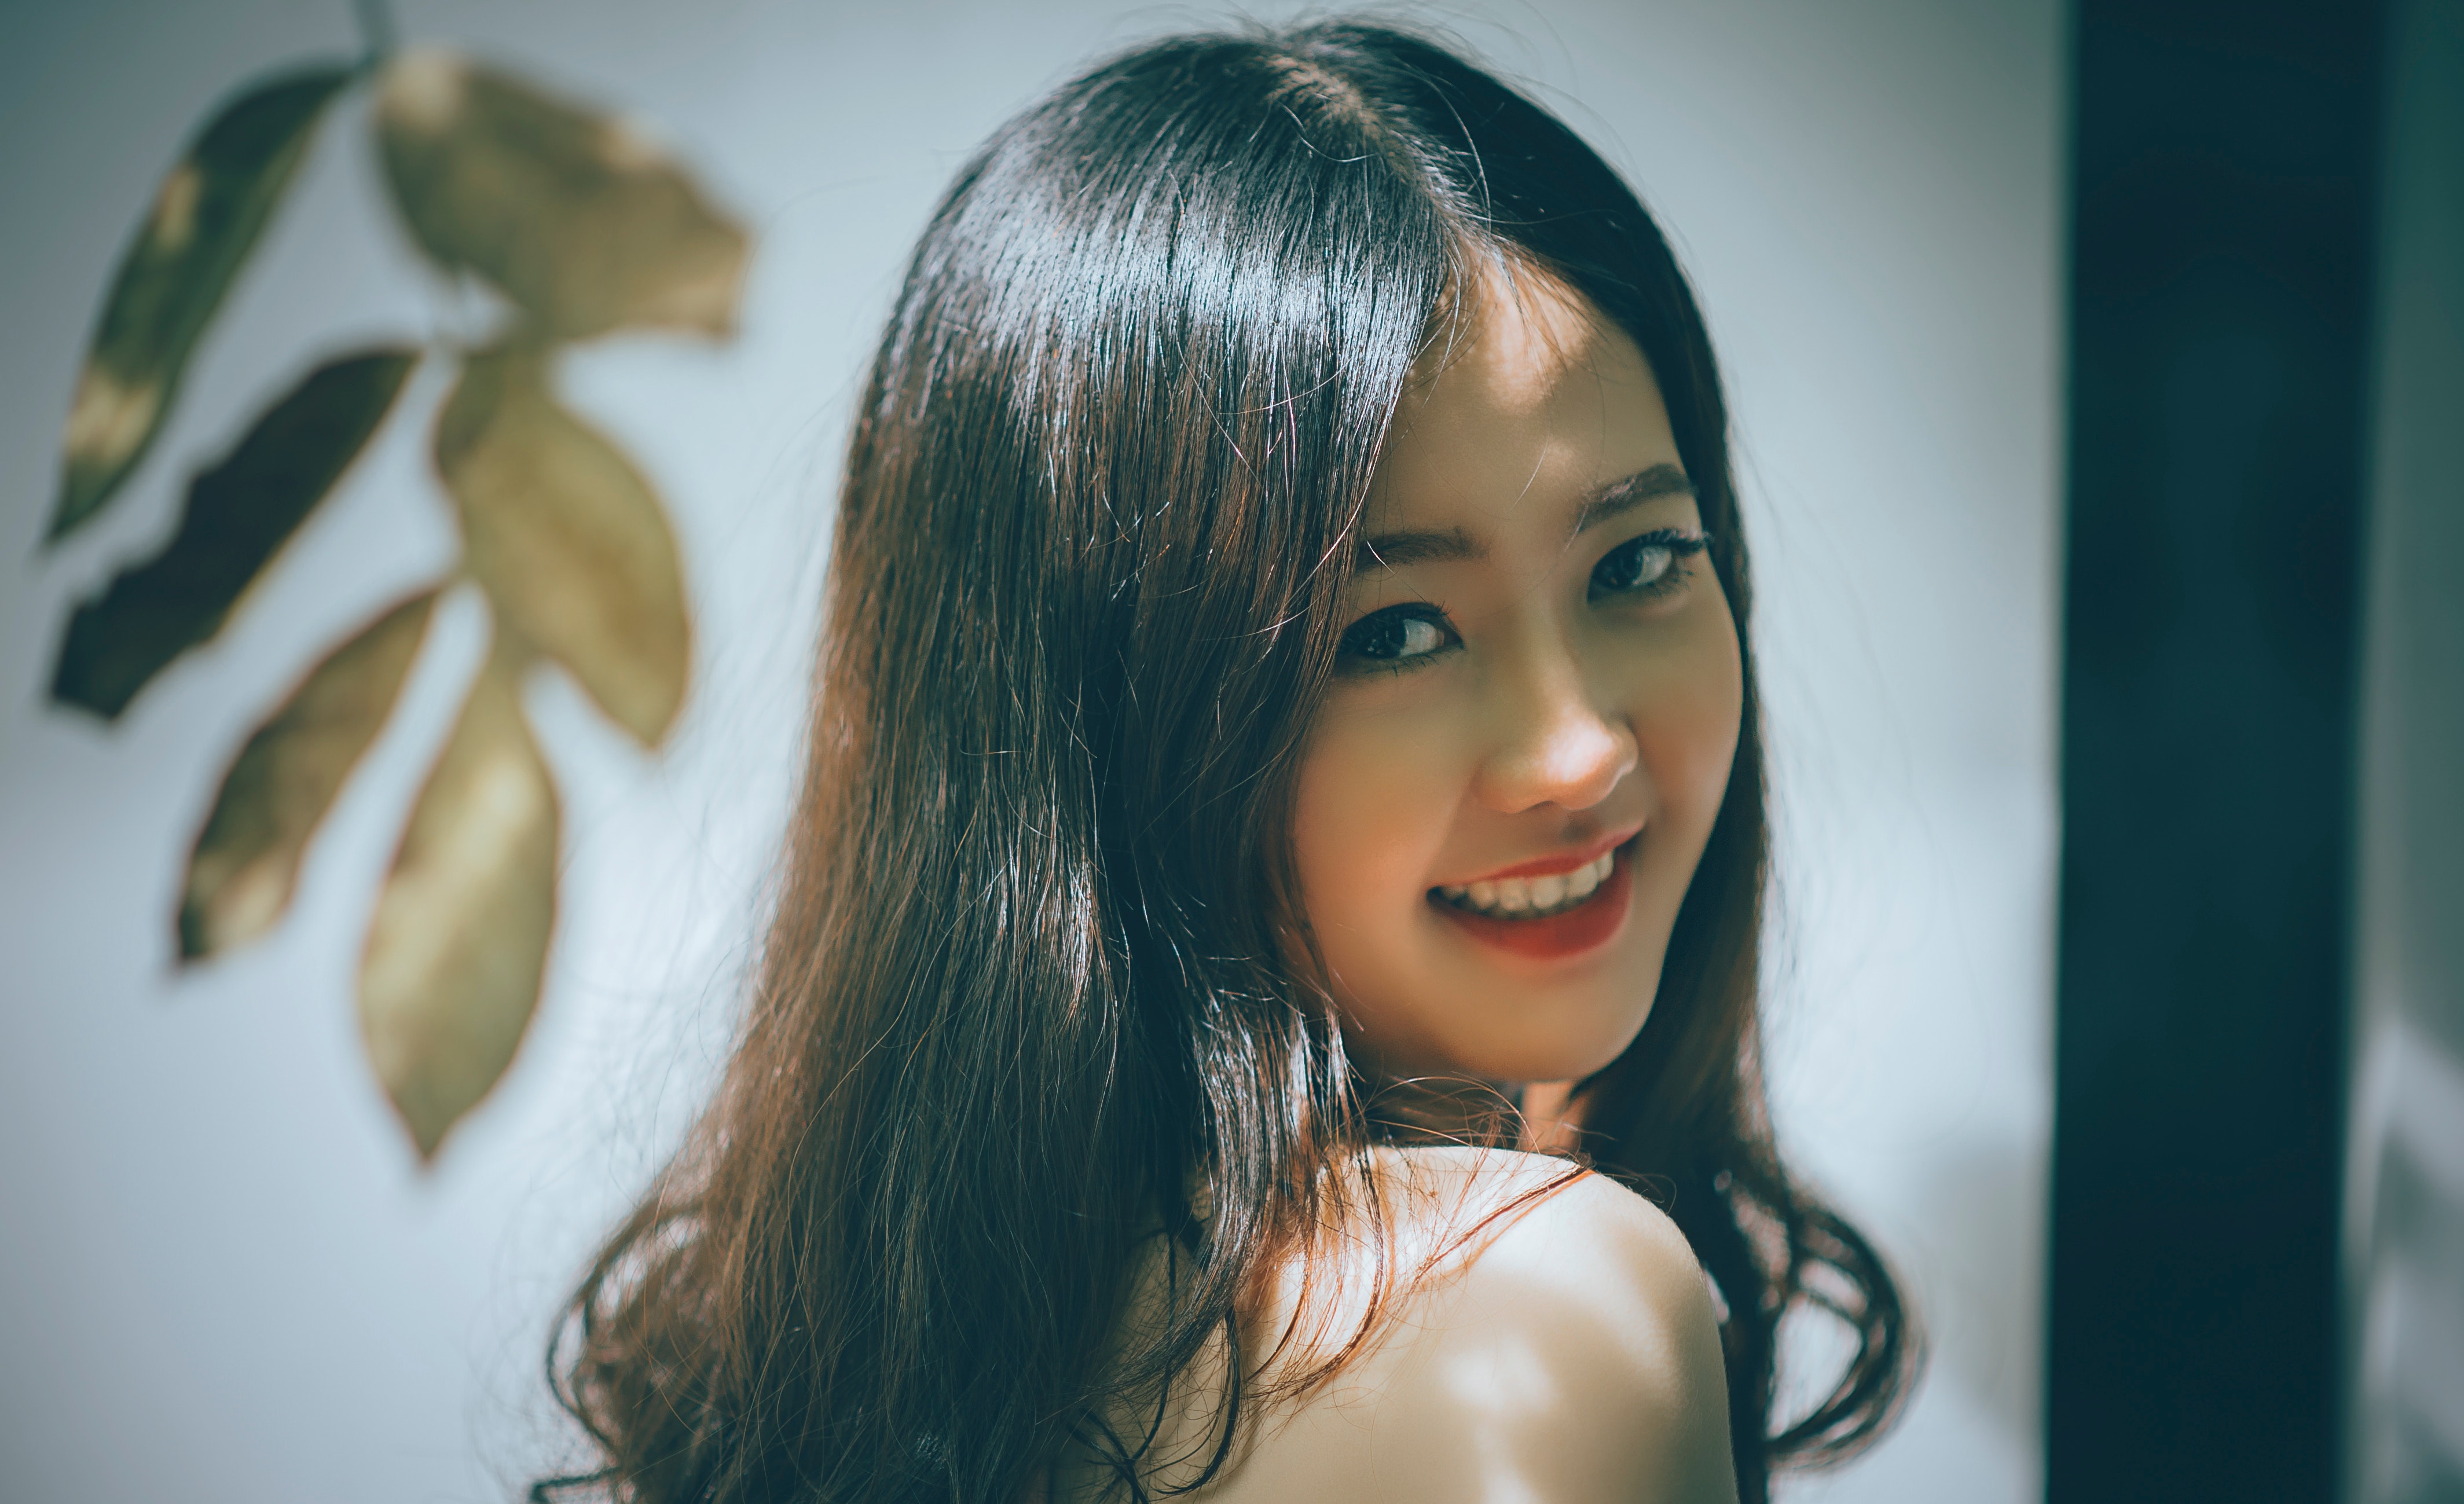 Woman with black long hair smiling photo